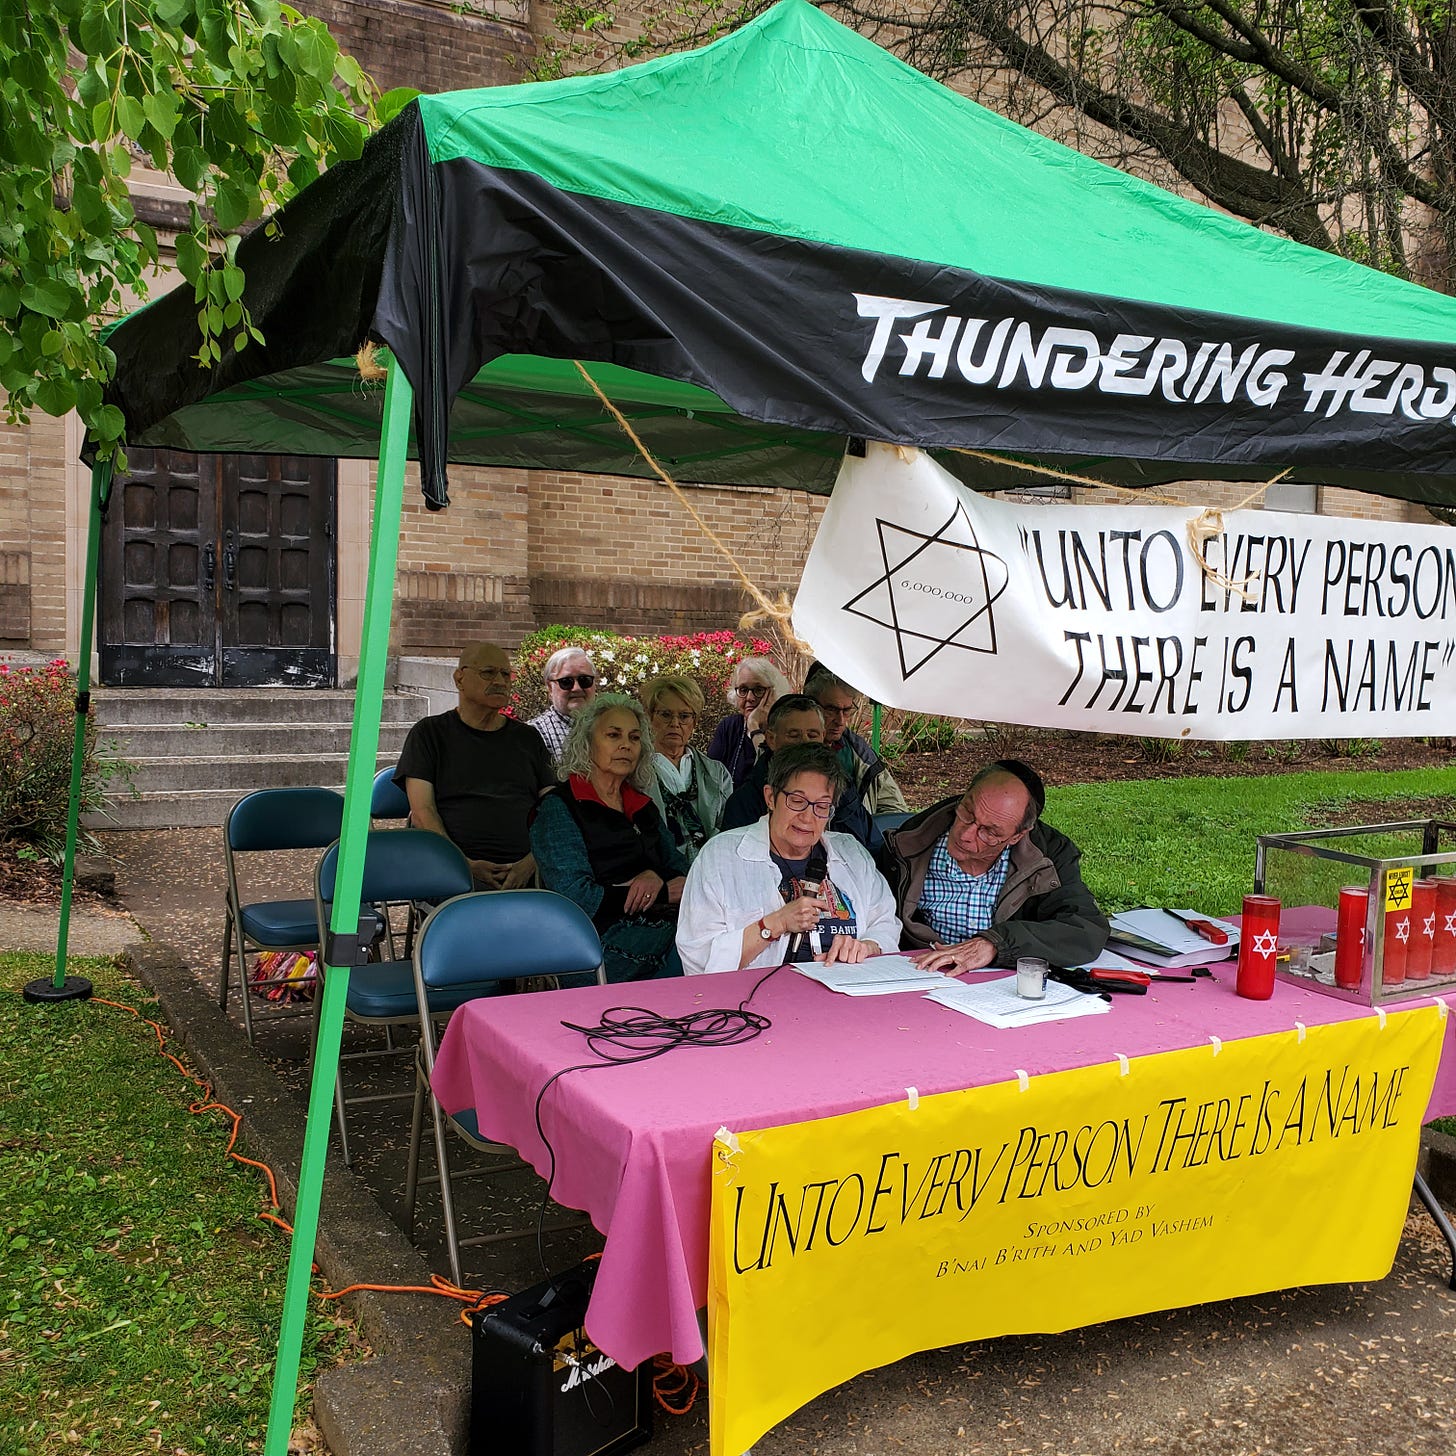 A group of nine people sit under an awning branded "Thundering Herd." There is a banner that reads "Unto every person there is a name." 